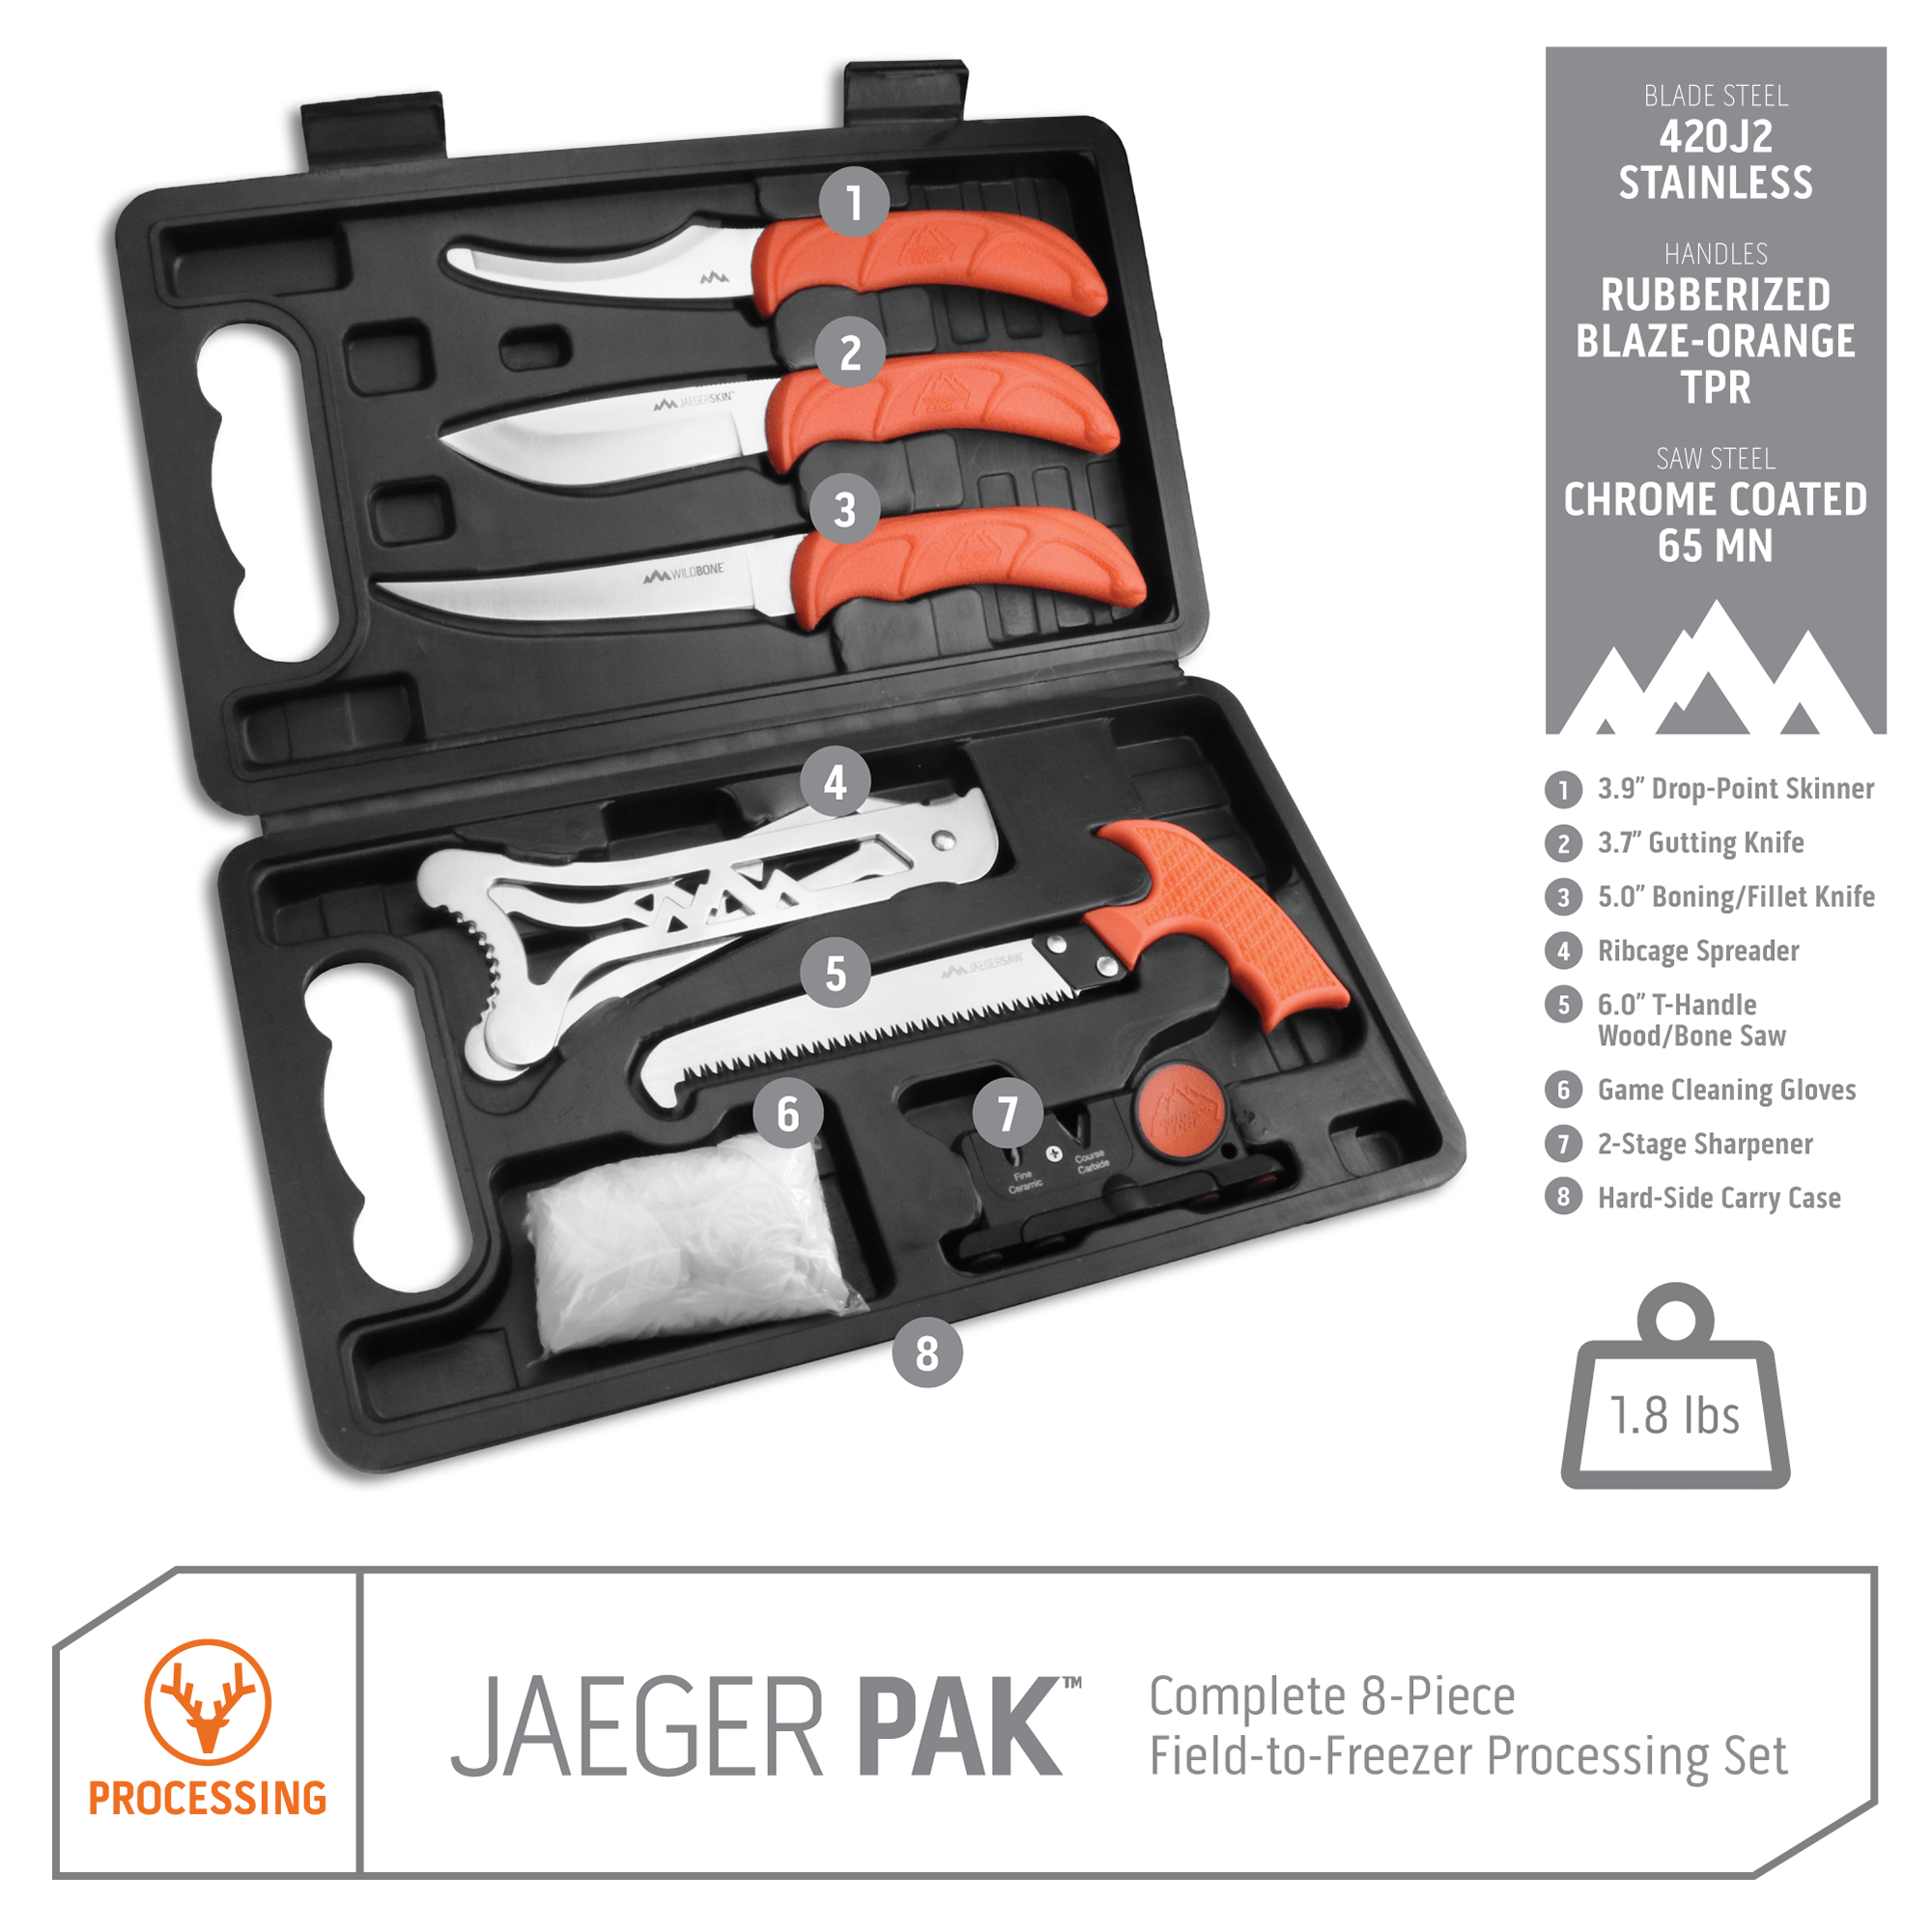 Outdoor Edge Jaeger Pak knife set product photo with callouts for all knives